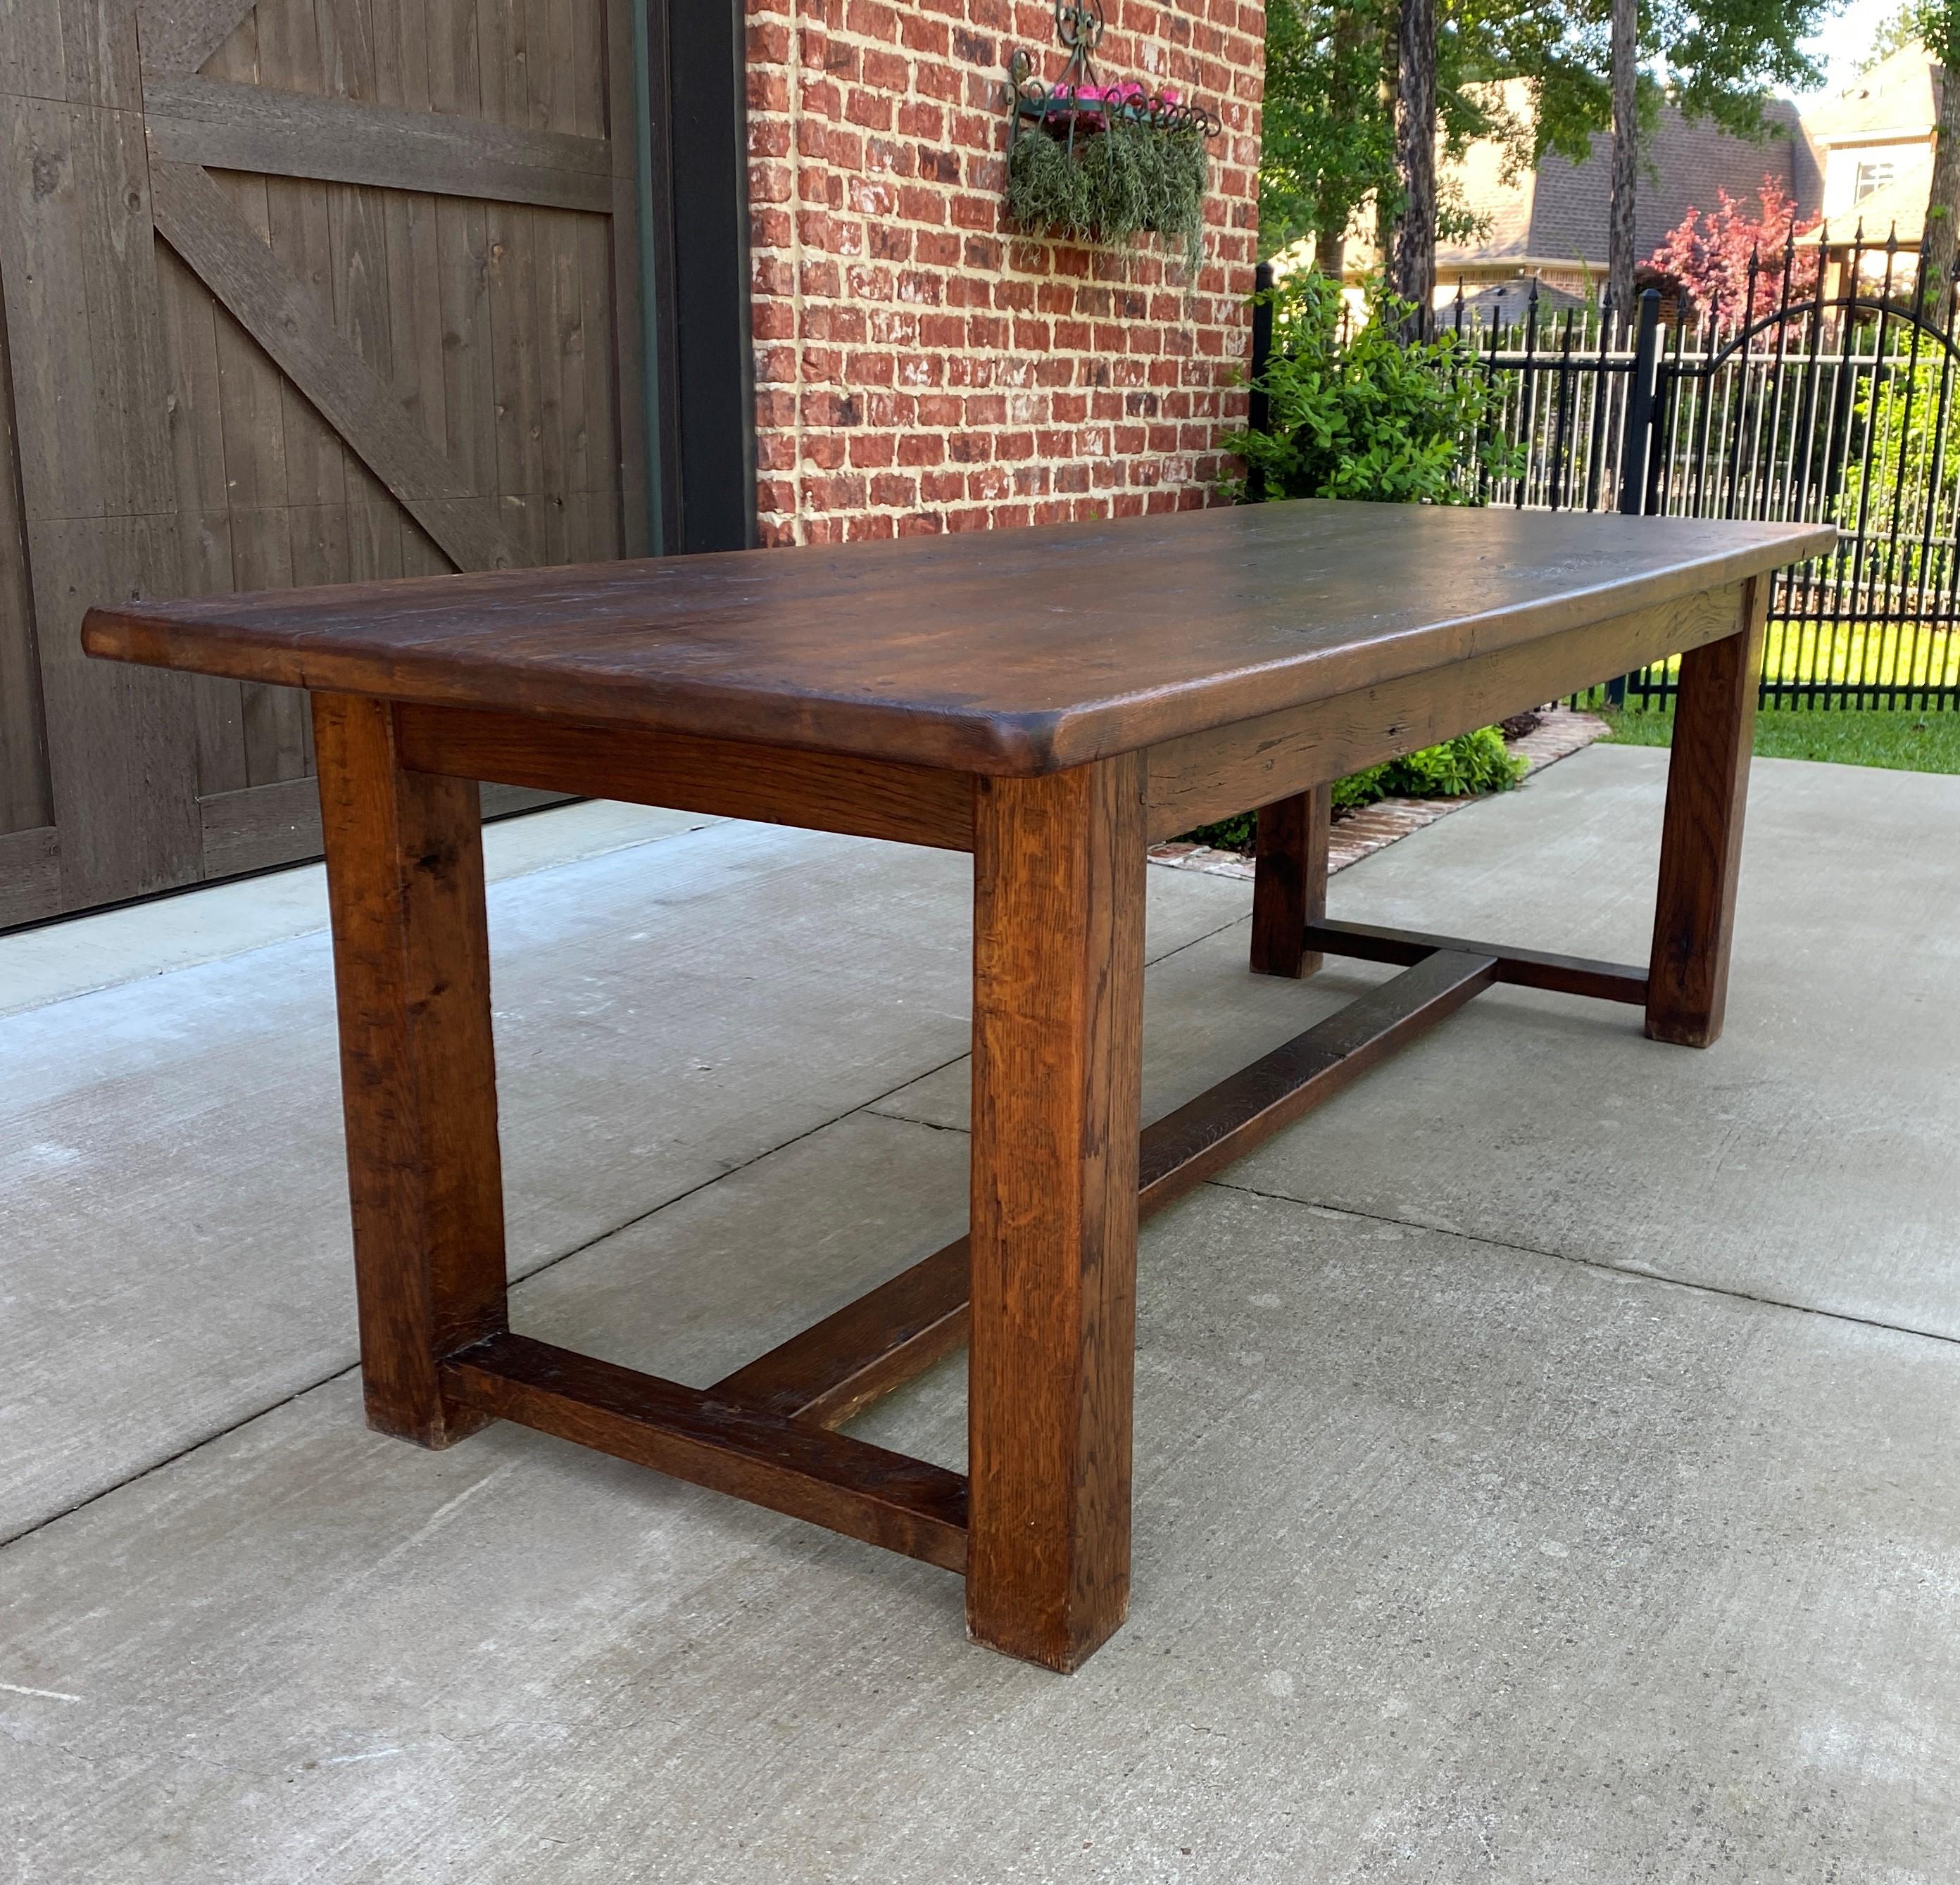 Carved Antique French Farm Table Dining Library Table Desk Farmhouse Oak Rustic 19C